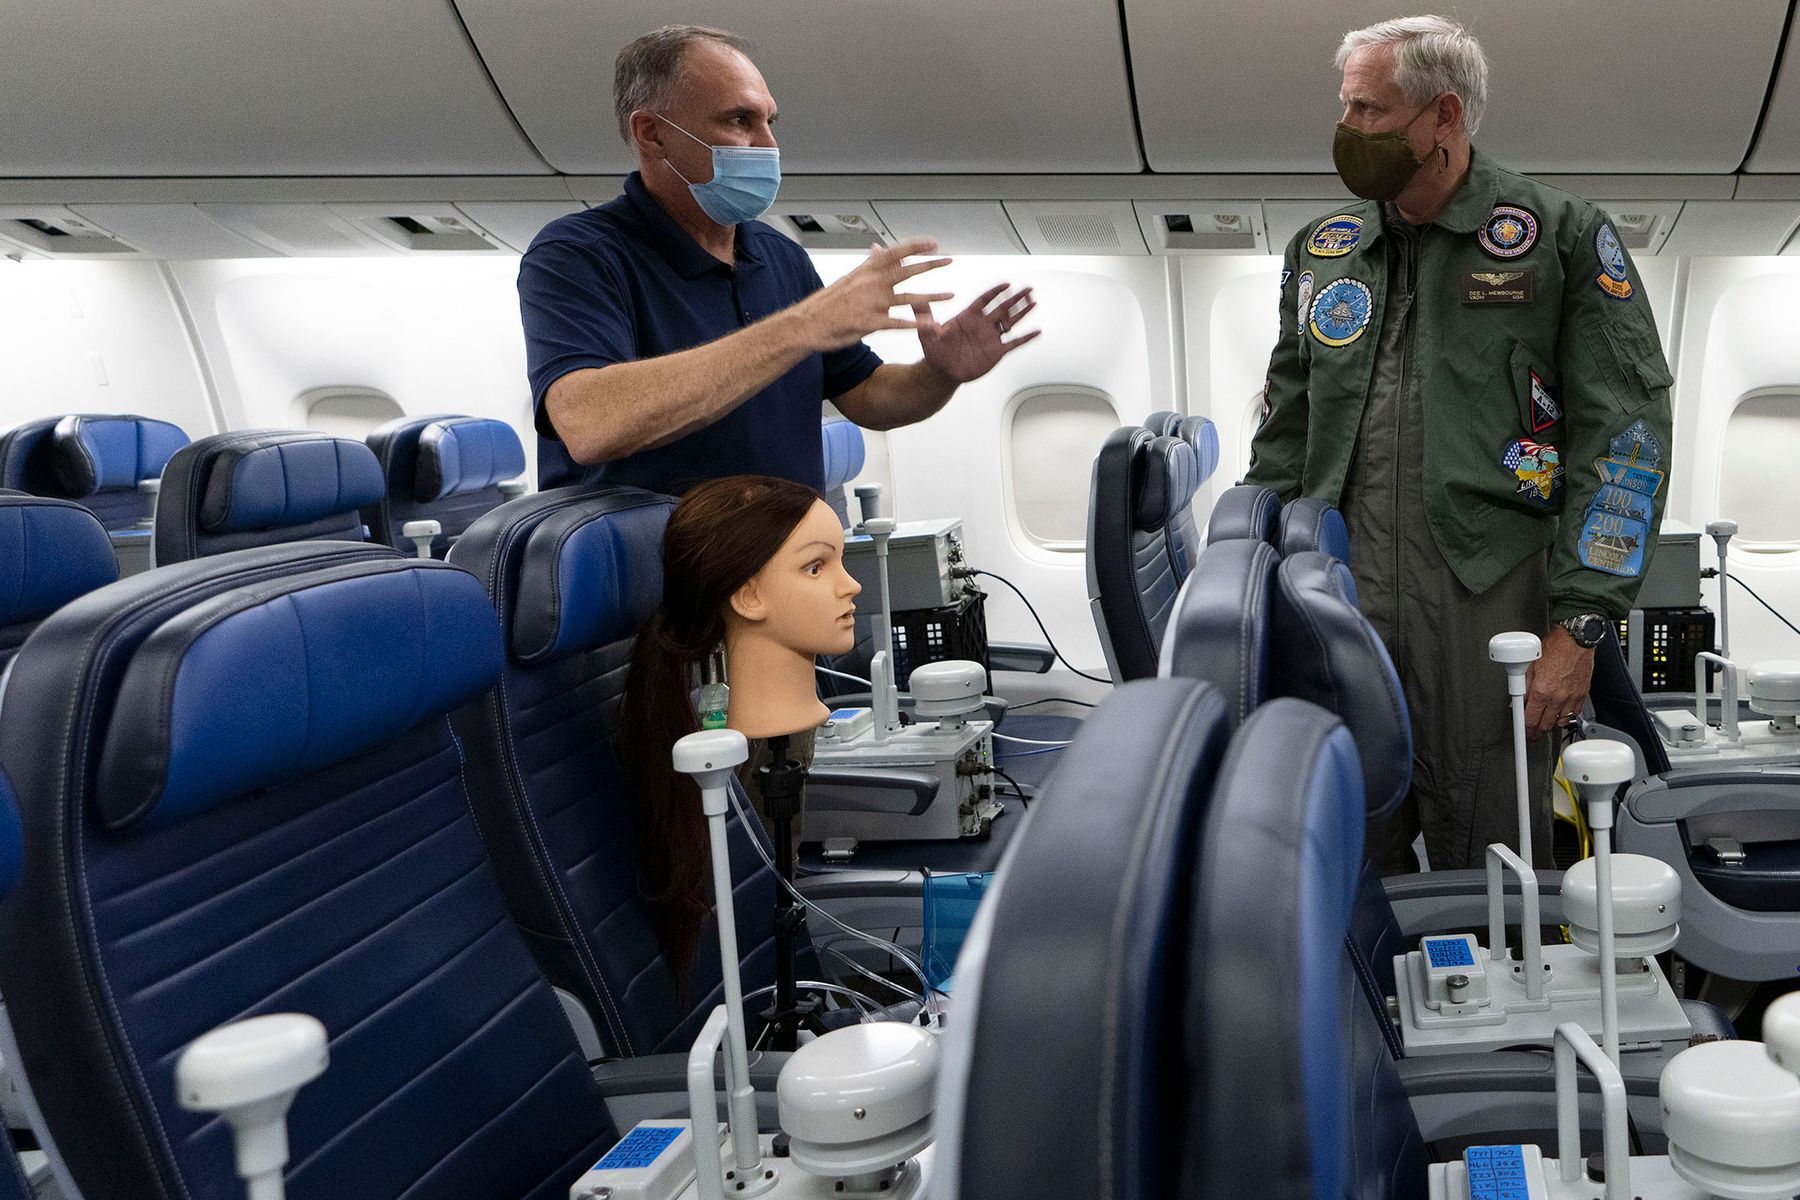 How coughing robot-dummies may unlock the return of air travel